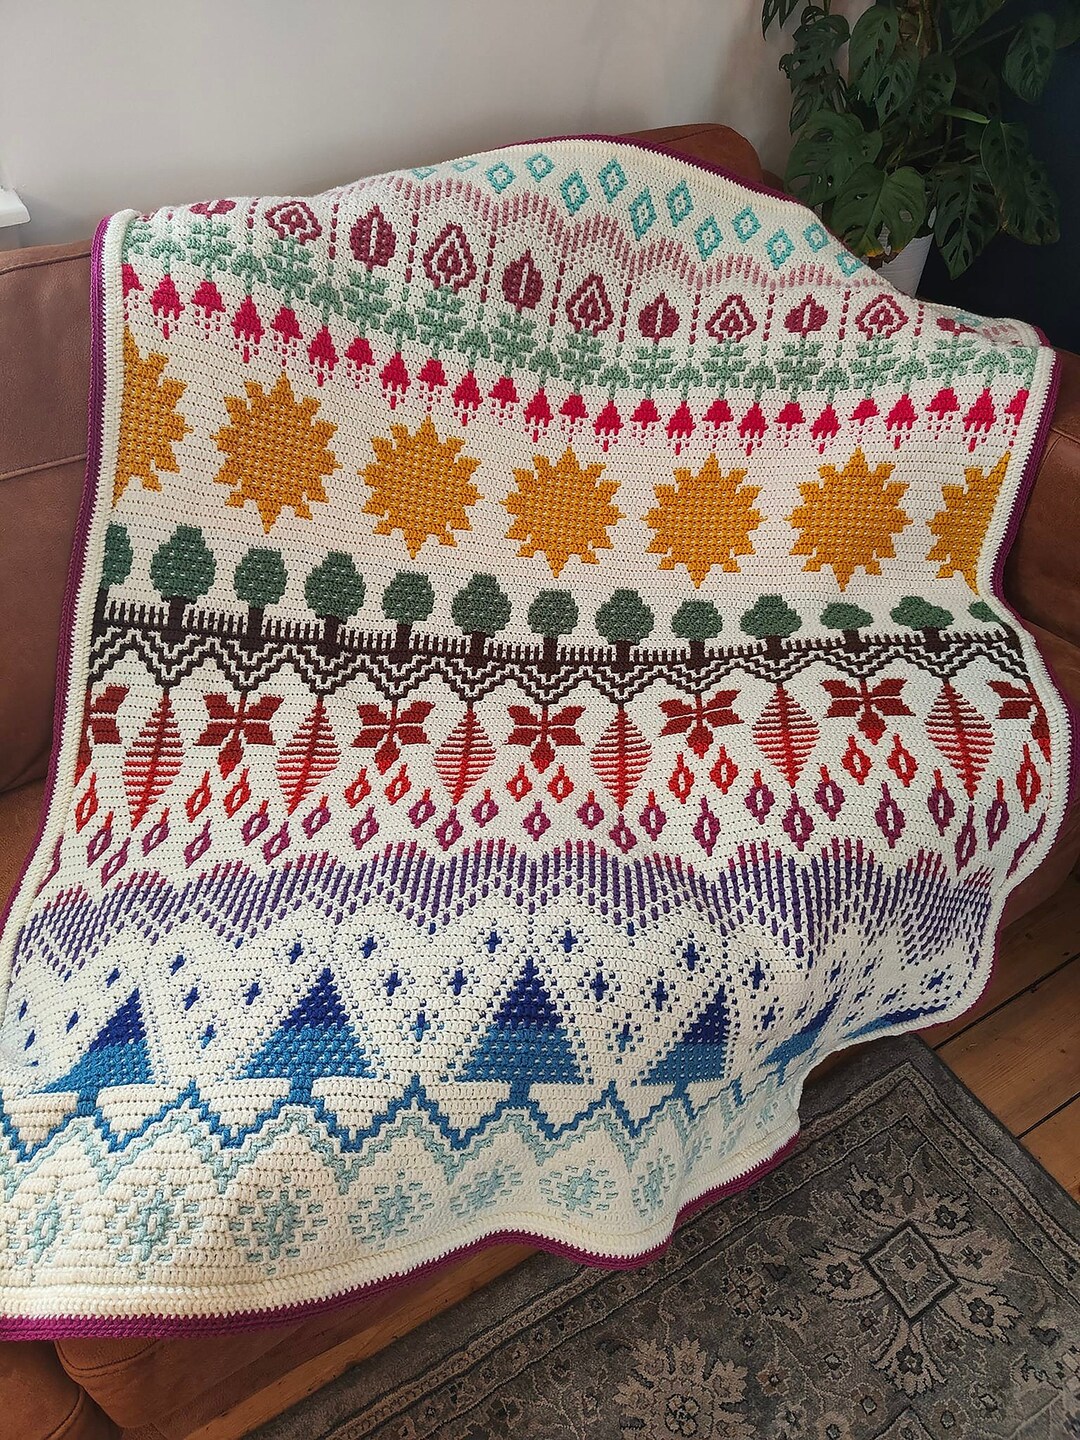 You Can Now Order My Book! The Art of Crochet Blankets, cypress